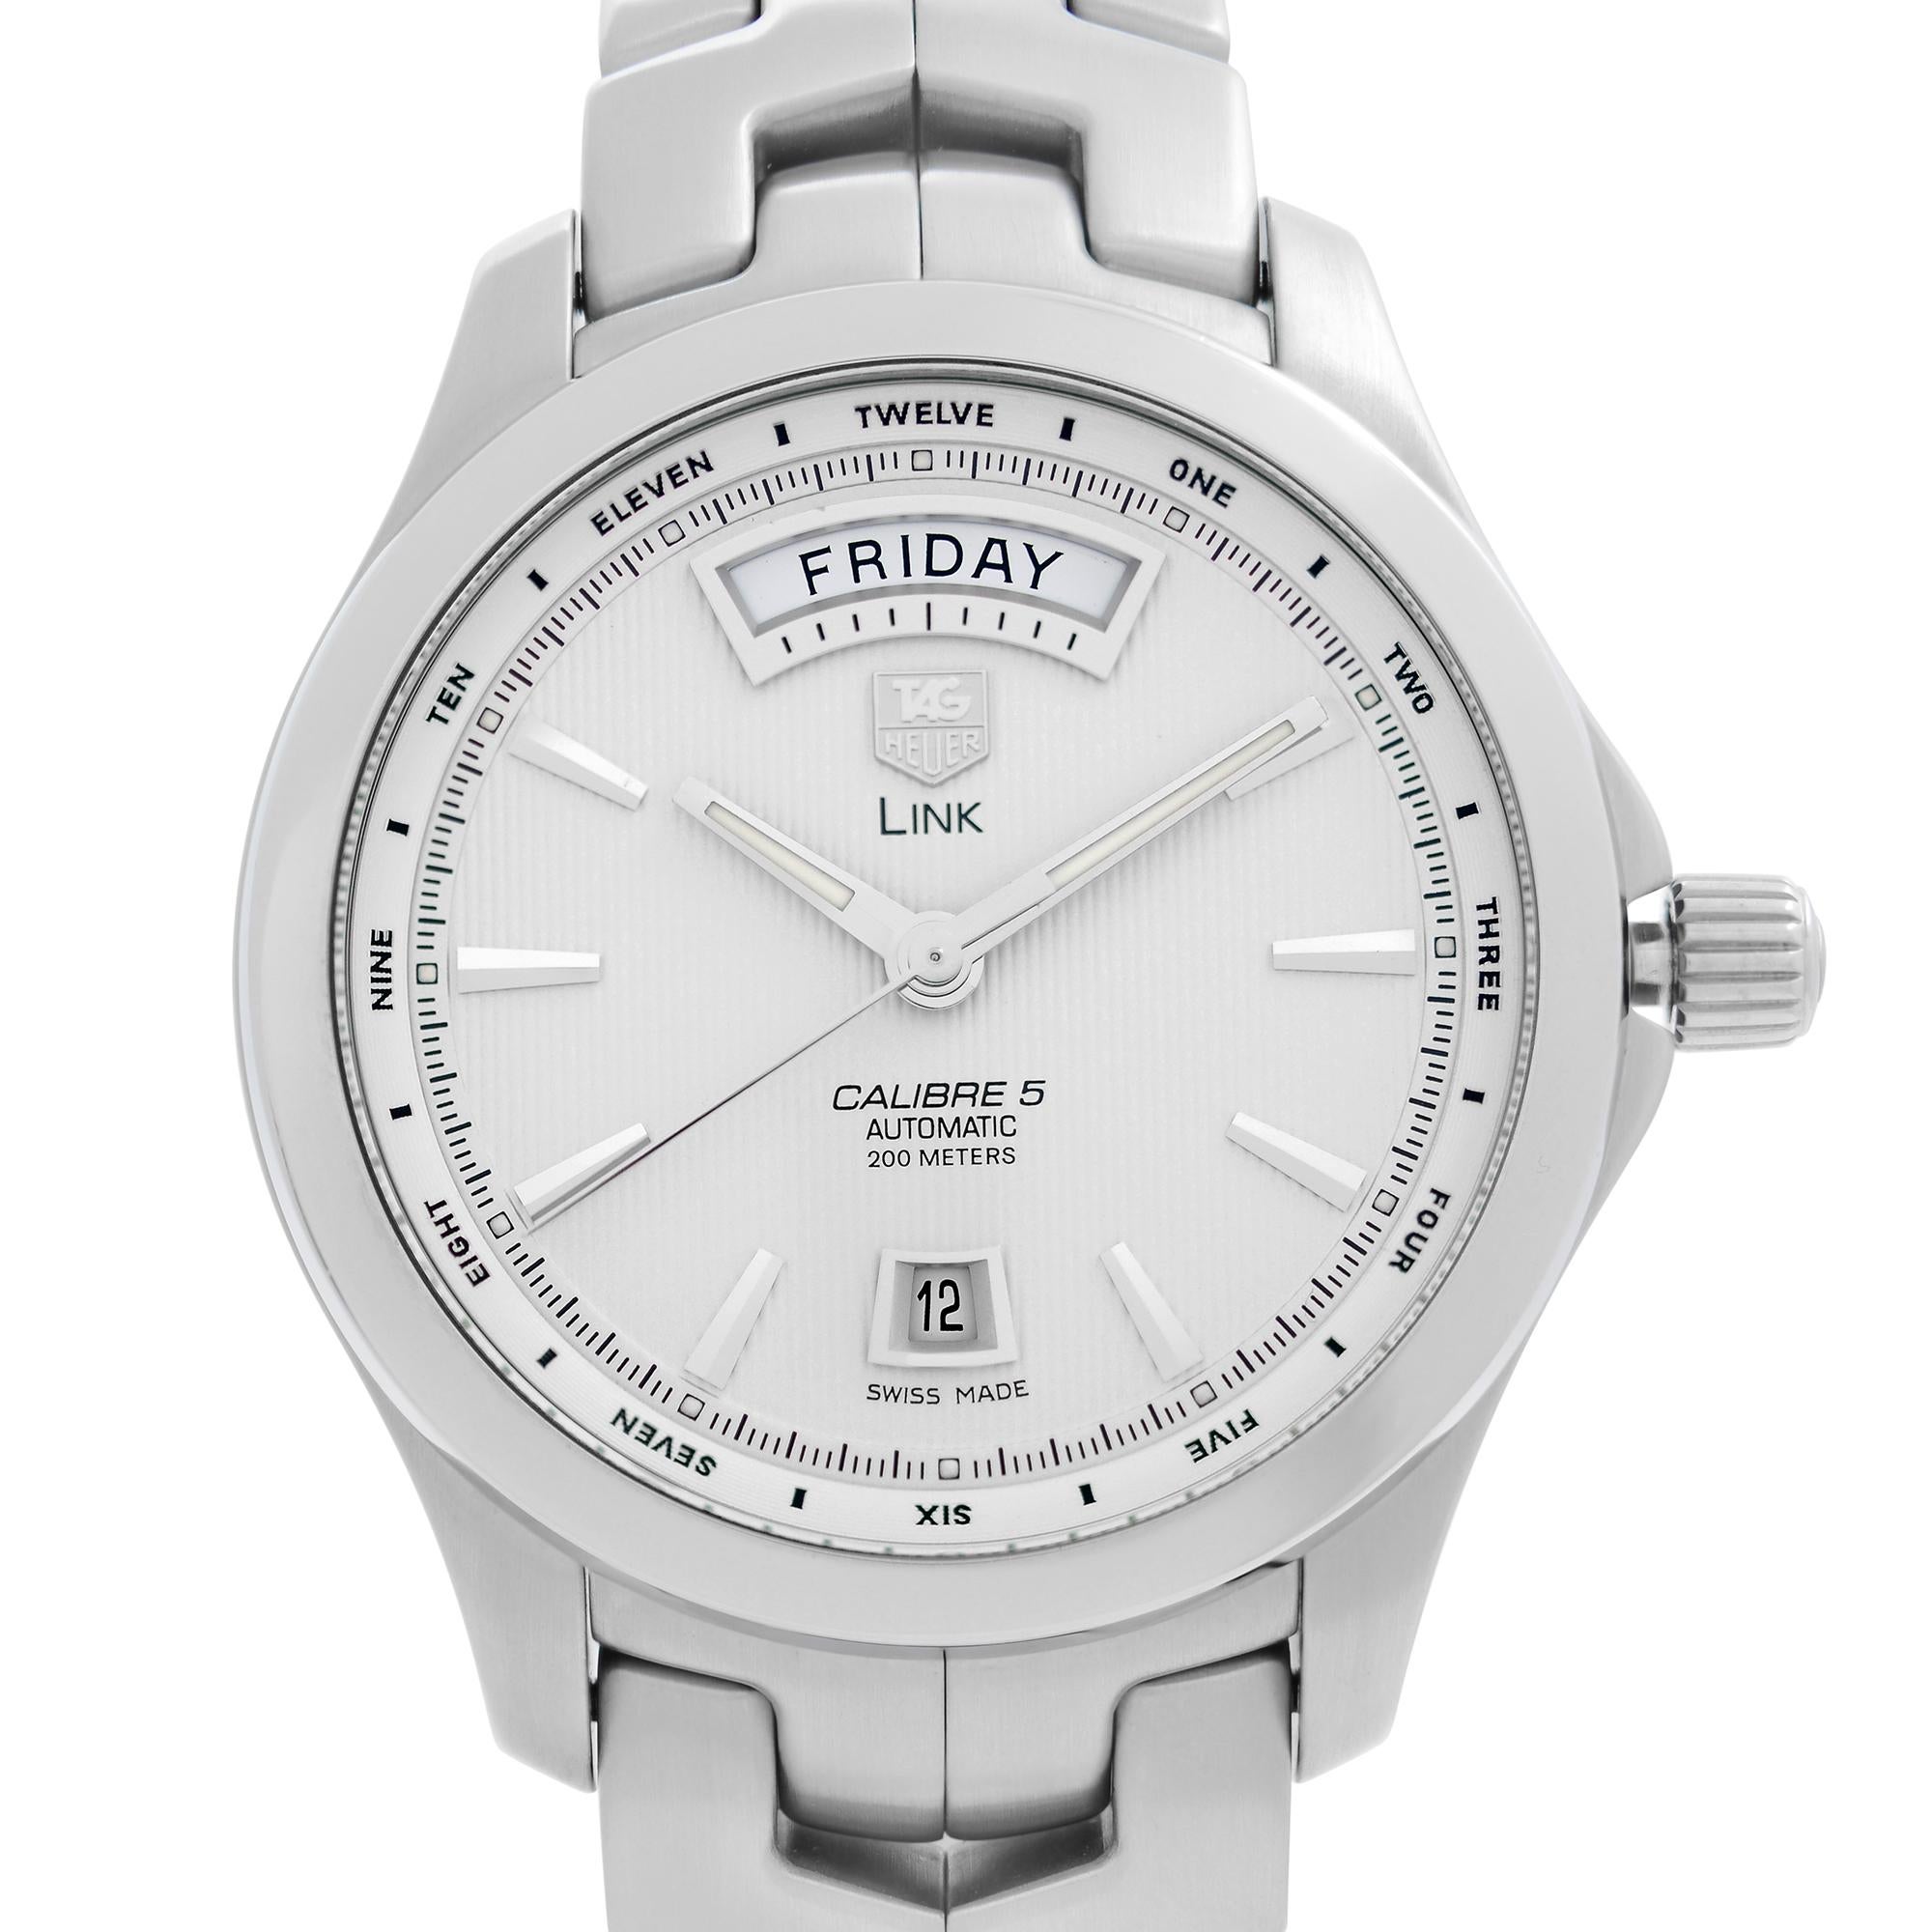 Pre-owned Tag Heuer Link Day Date Stainless Steel White Dial Automatic Men's Watch. . Original Box is included. No Original Papers. Comes with the Chronostore Authenticity Card. Covered by 1-year Chronostore Warranty. 
Details:
MSRP 2800
Brand TAG